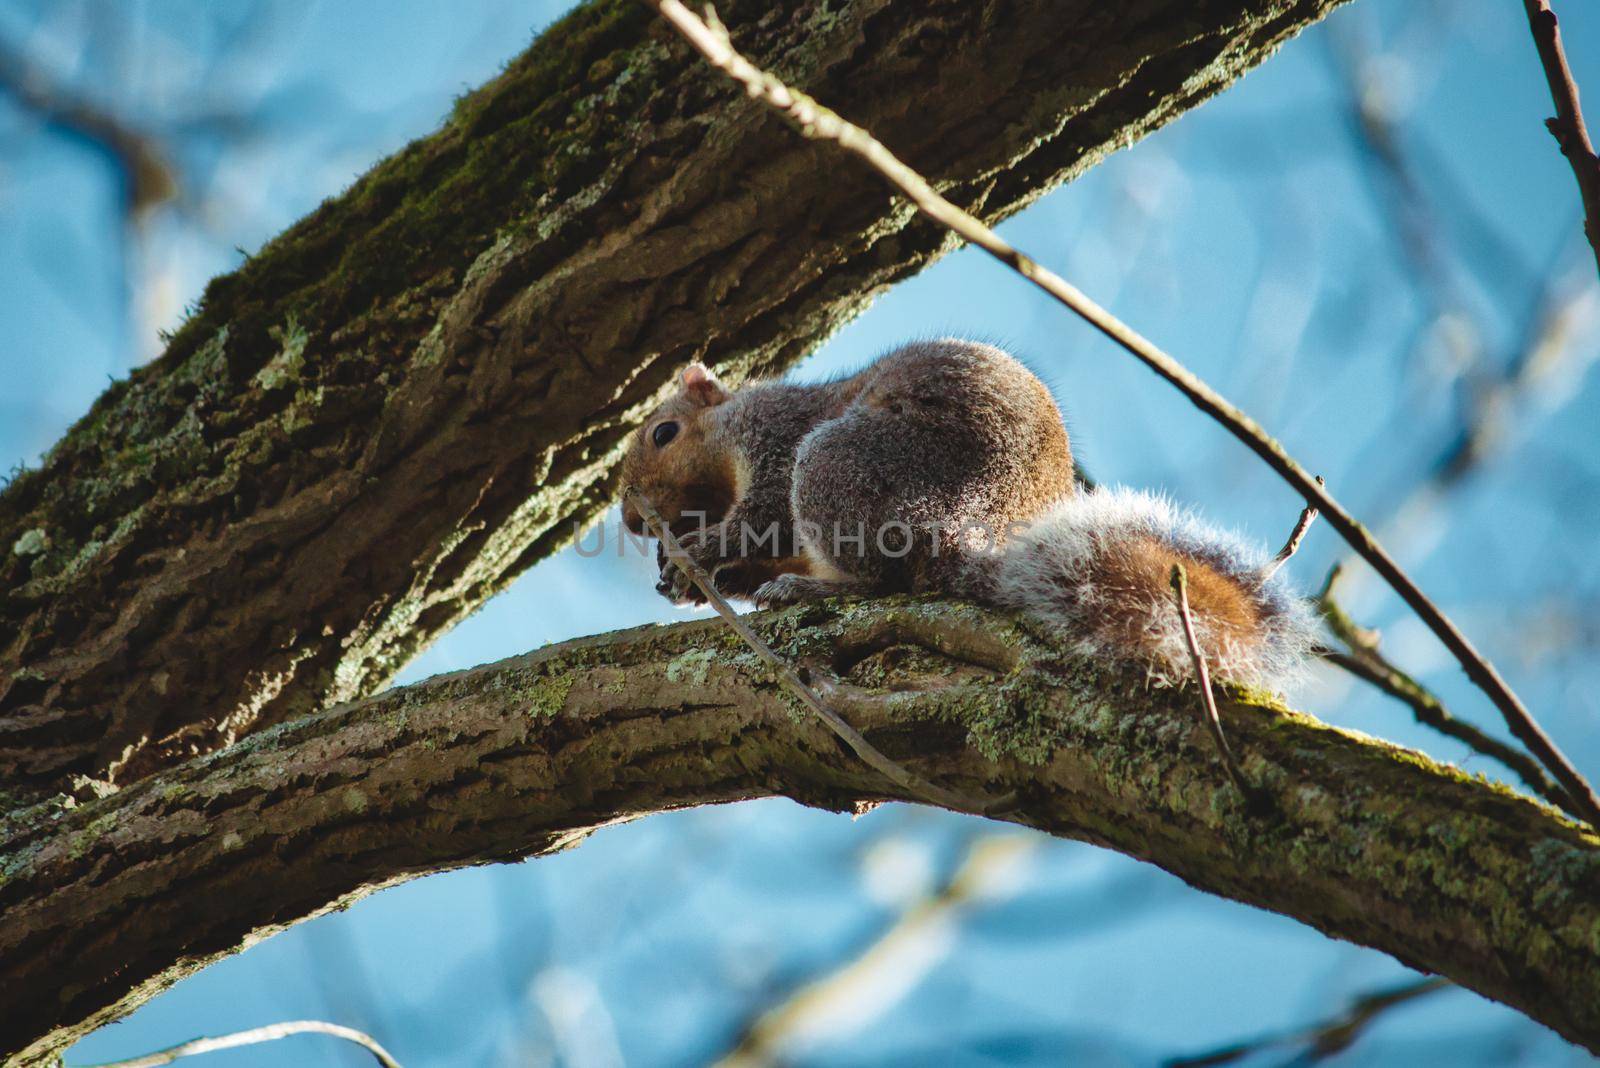 A cute furry grey squirrel on a branch high up in a tree